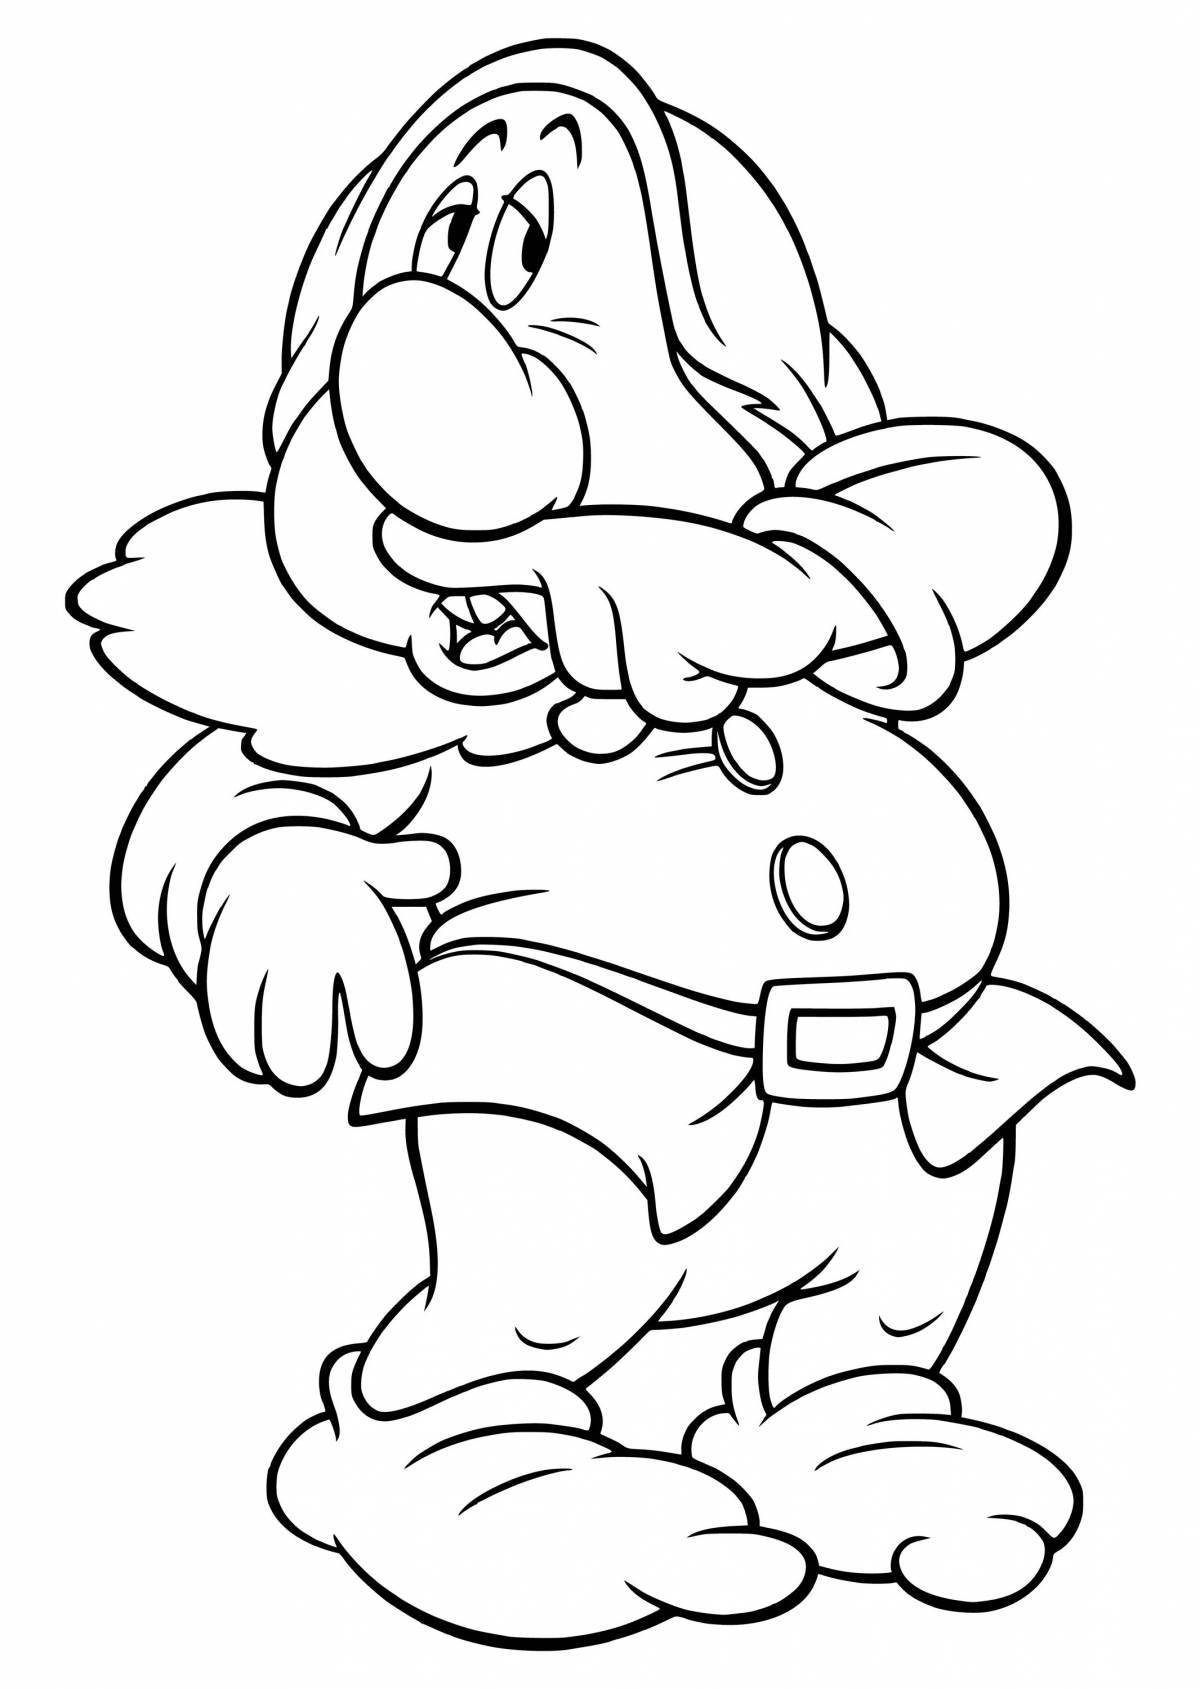 Animated gnome coloring page